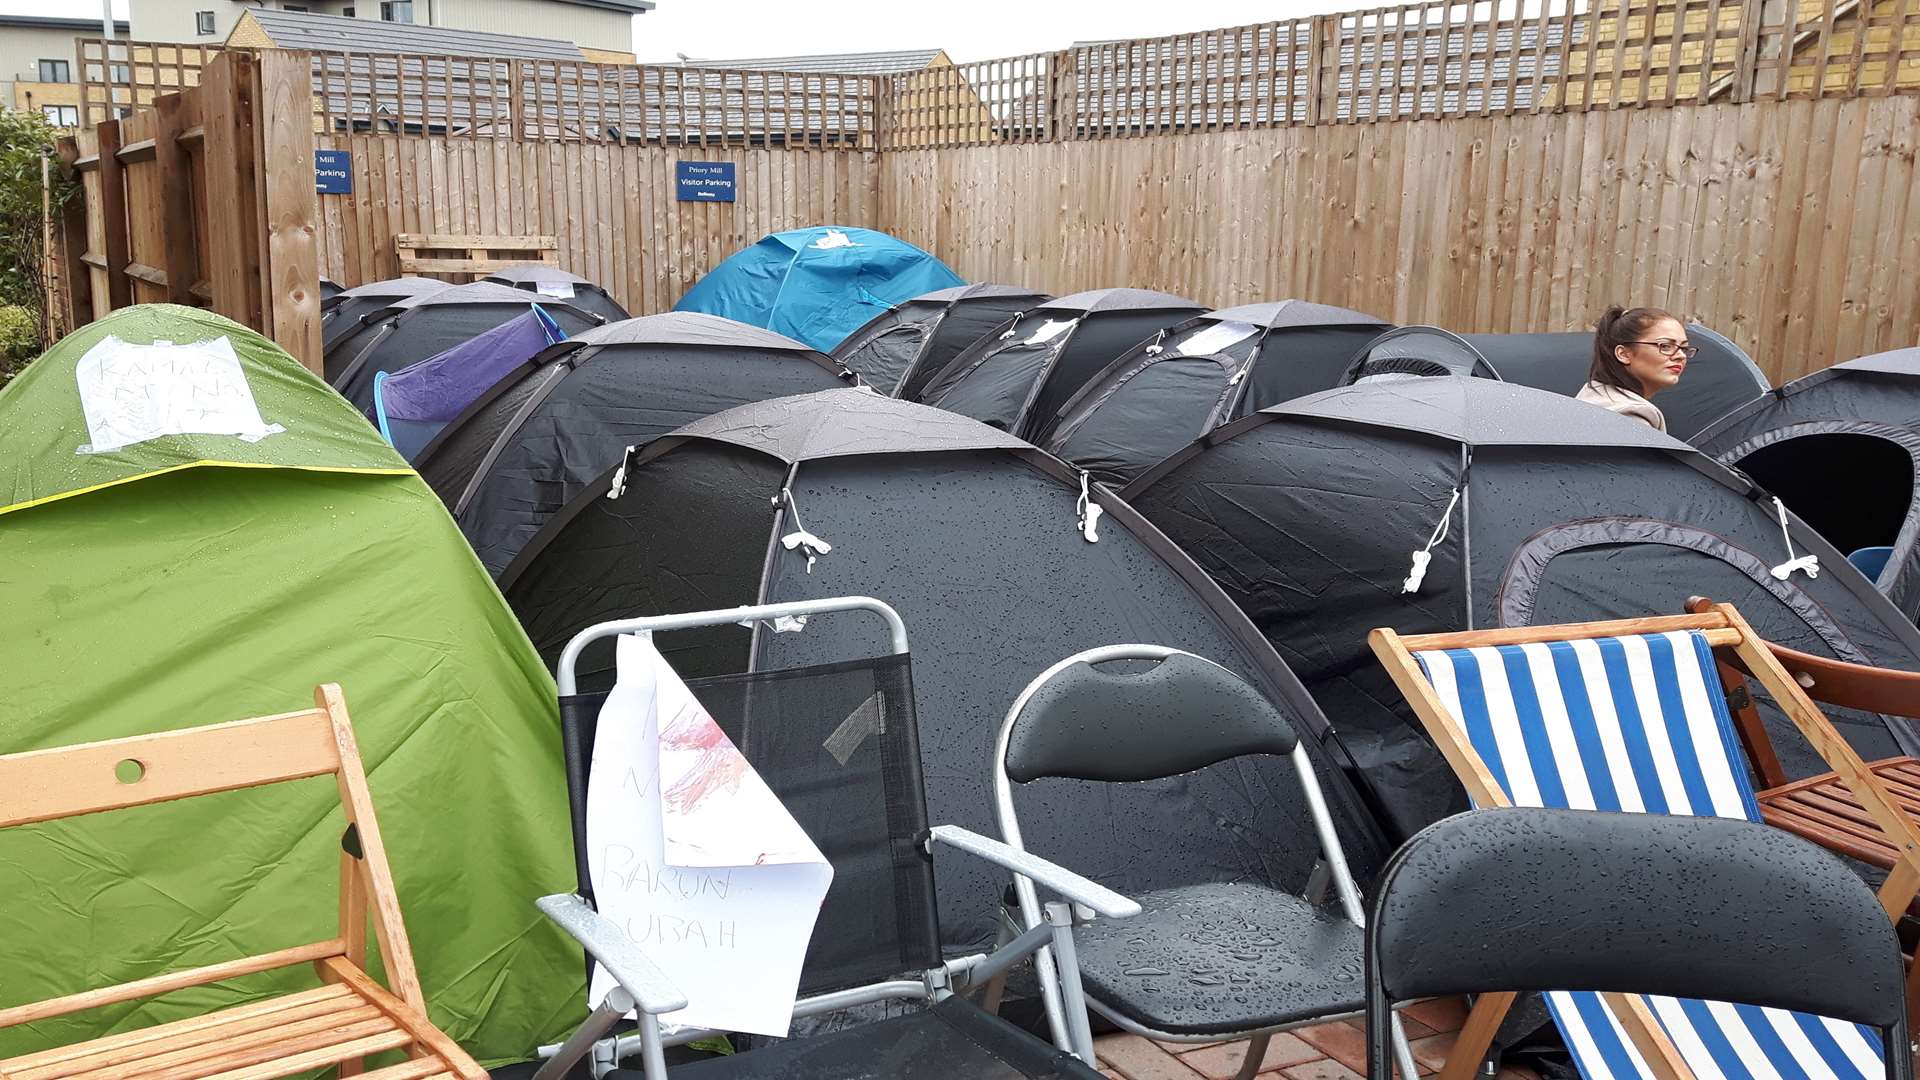 Tents were snapped up from the local Argos